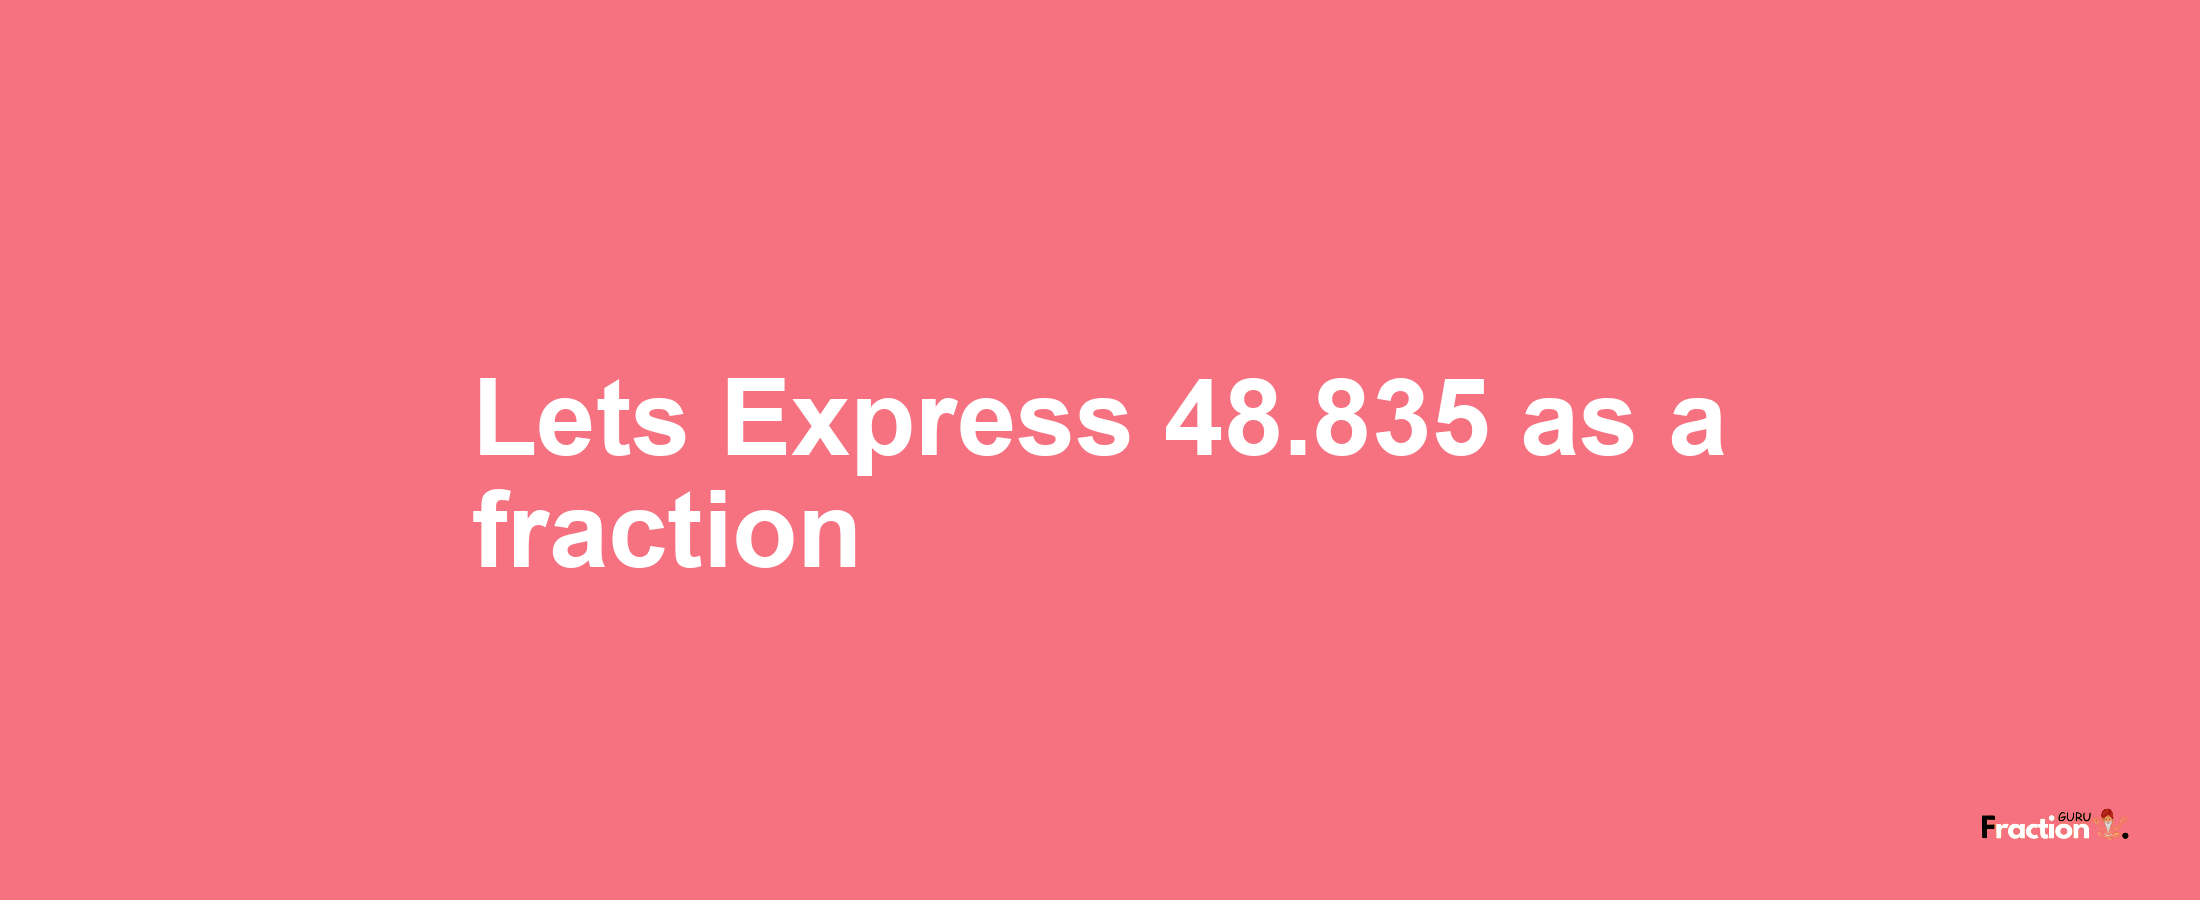 Lets Express 48.835 as afraction